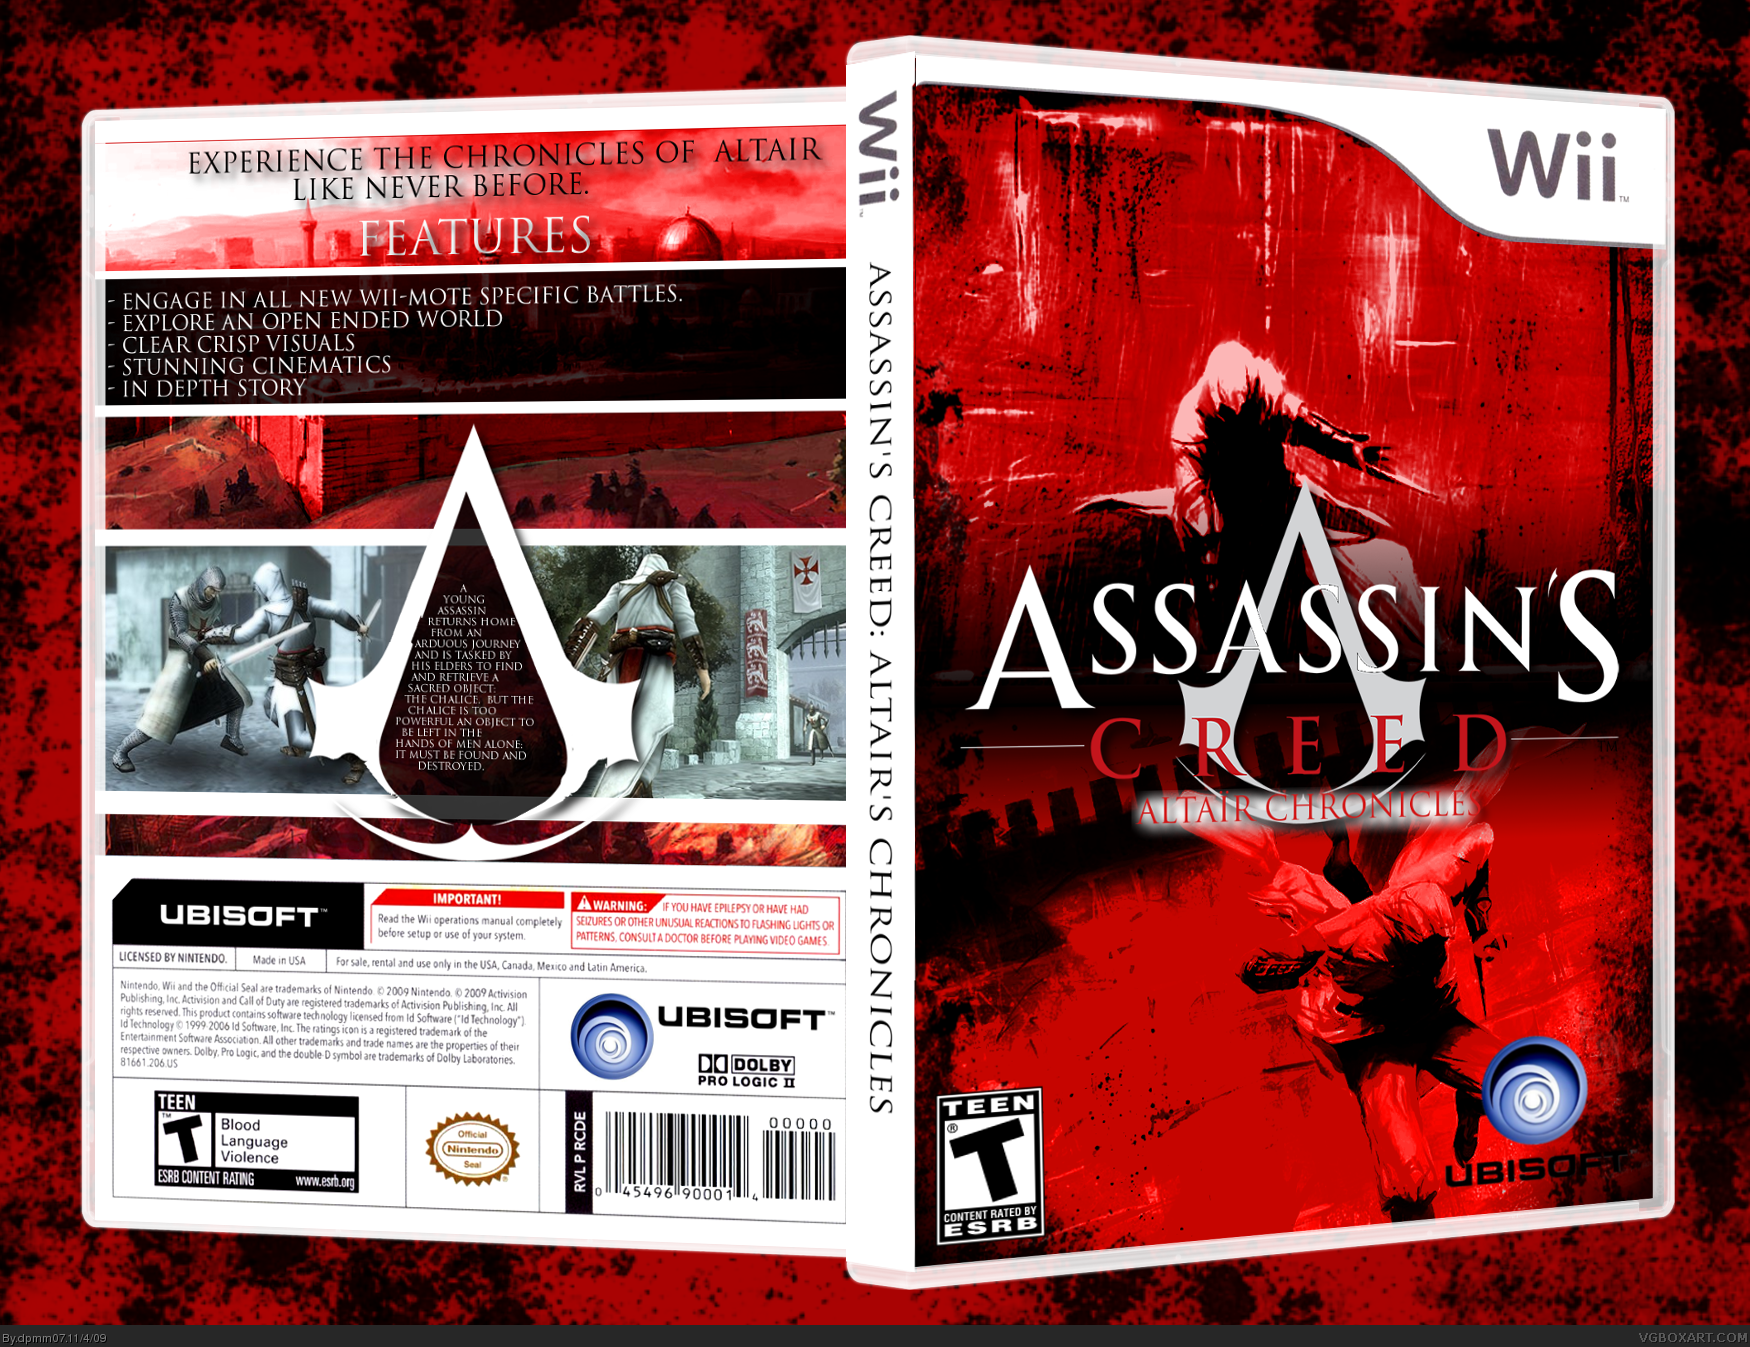 Assassin's Creed: Altair Chronicles box cover